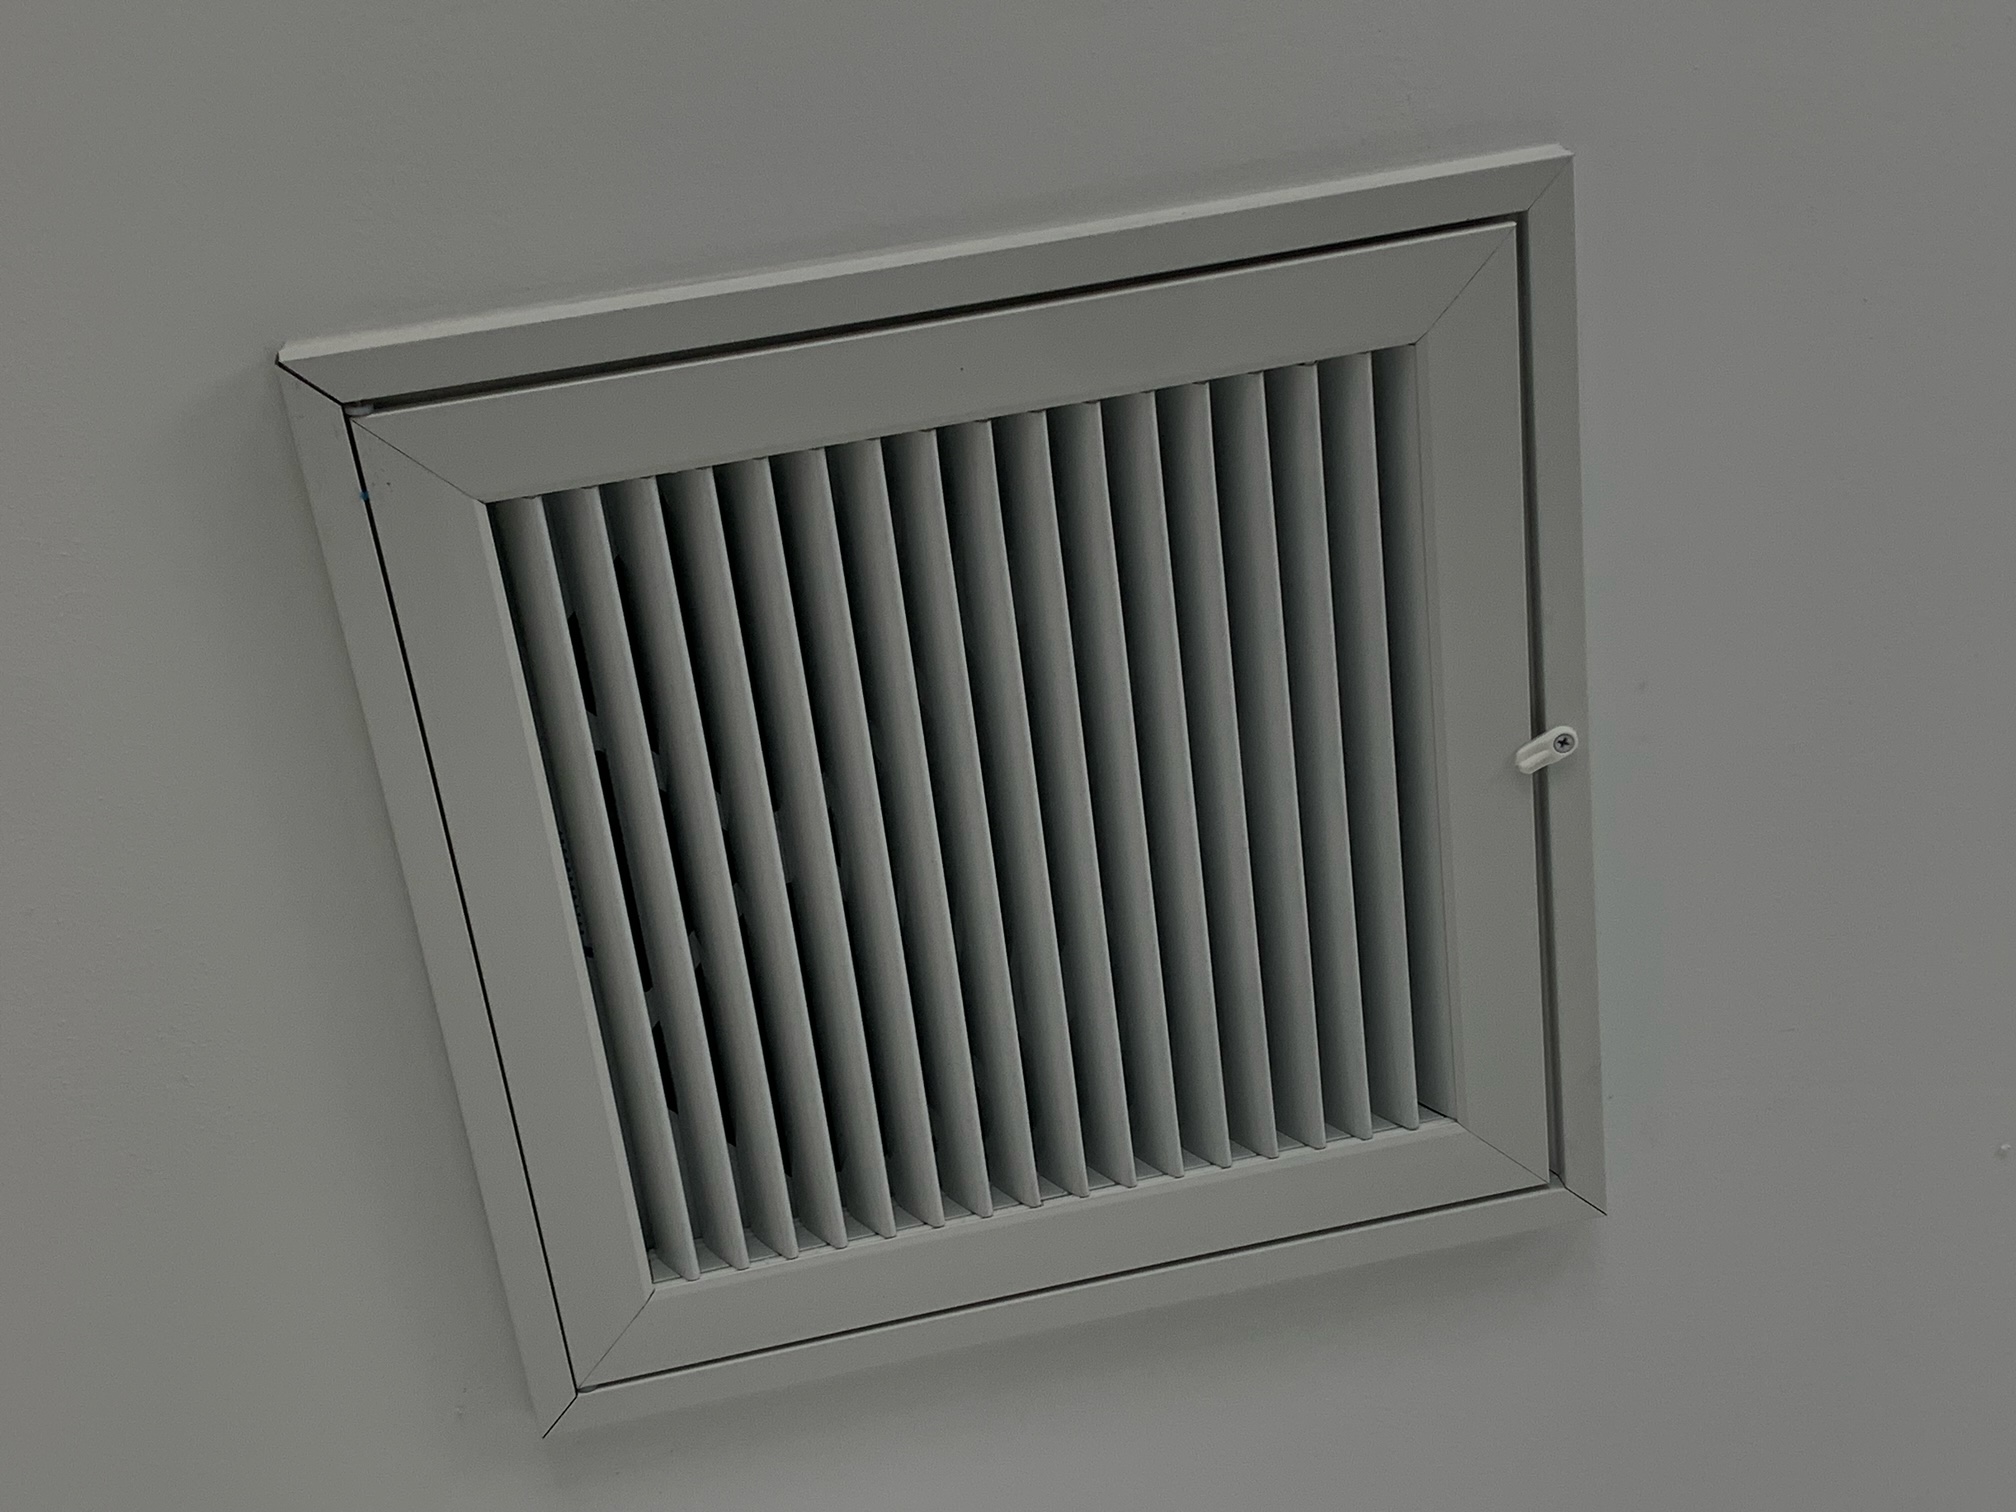 Closed return duct in ceiling with air filter.